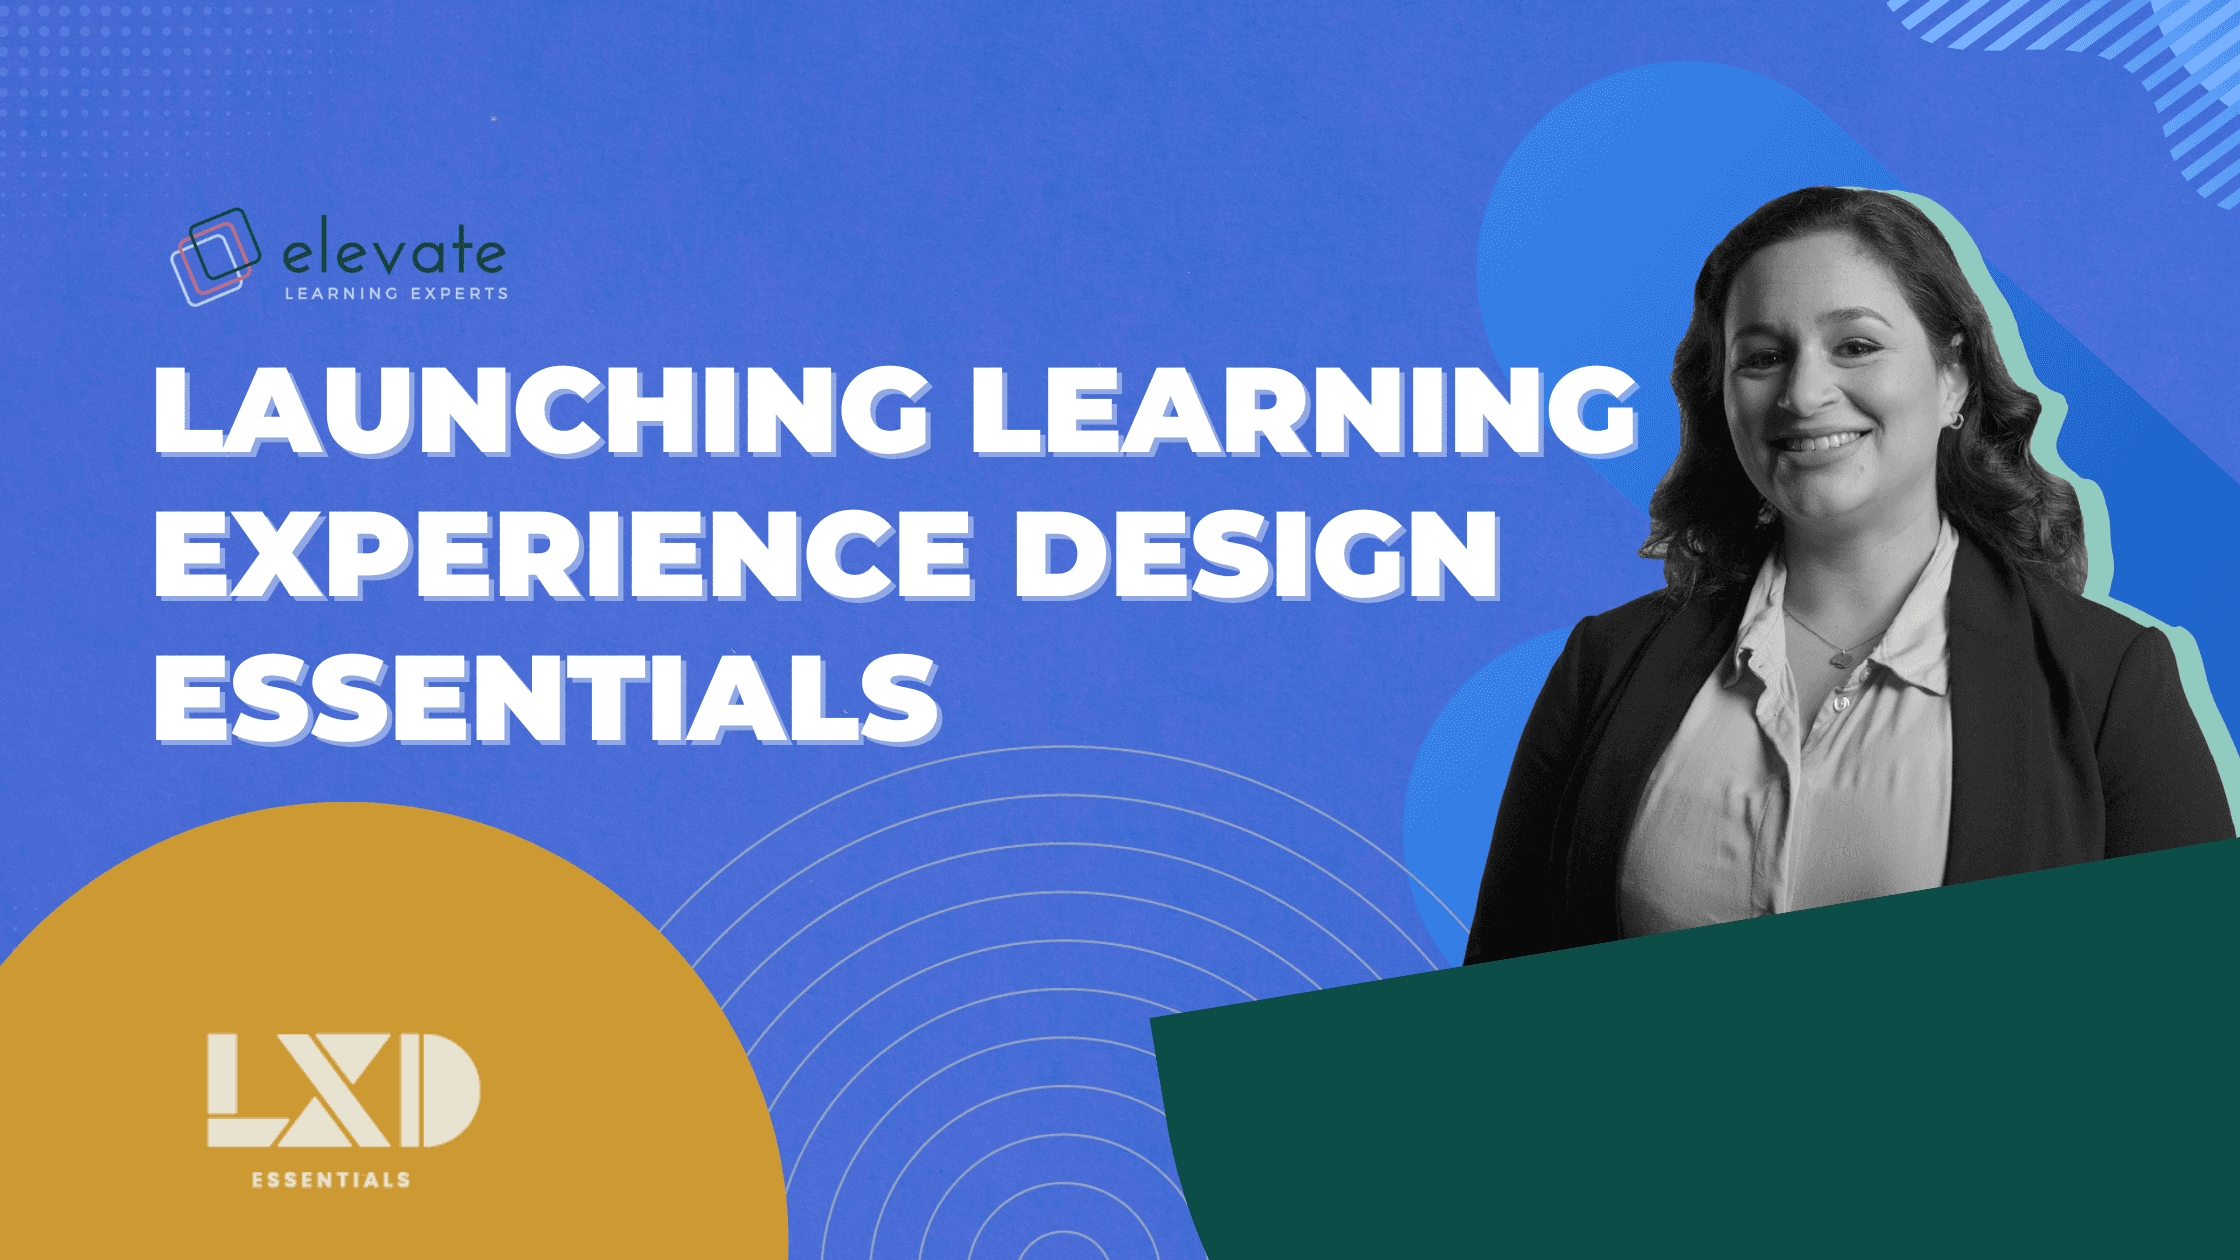 Launching Learning Experience Design Essentials